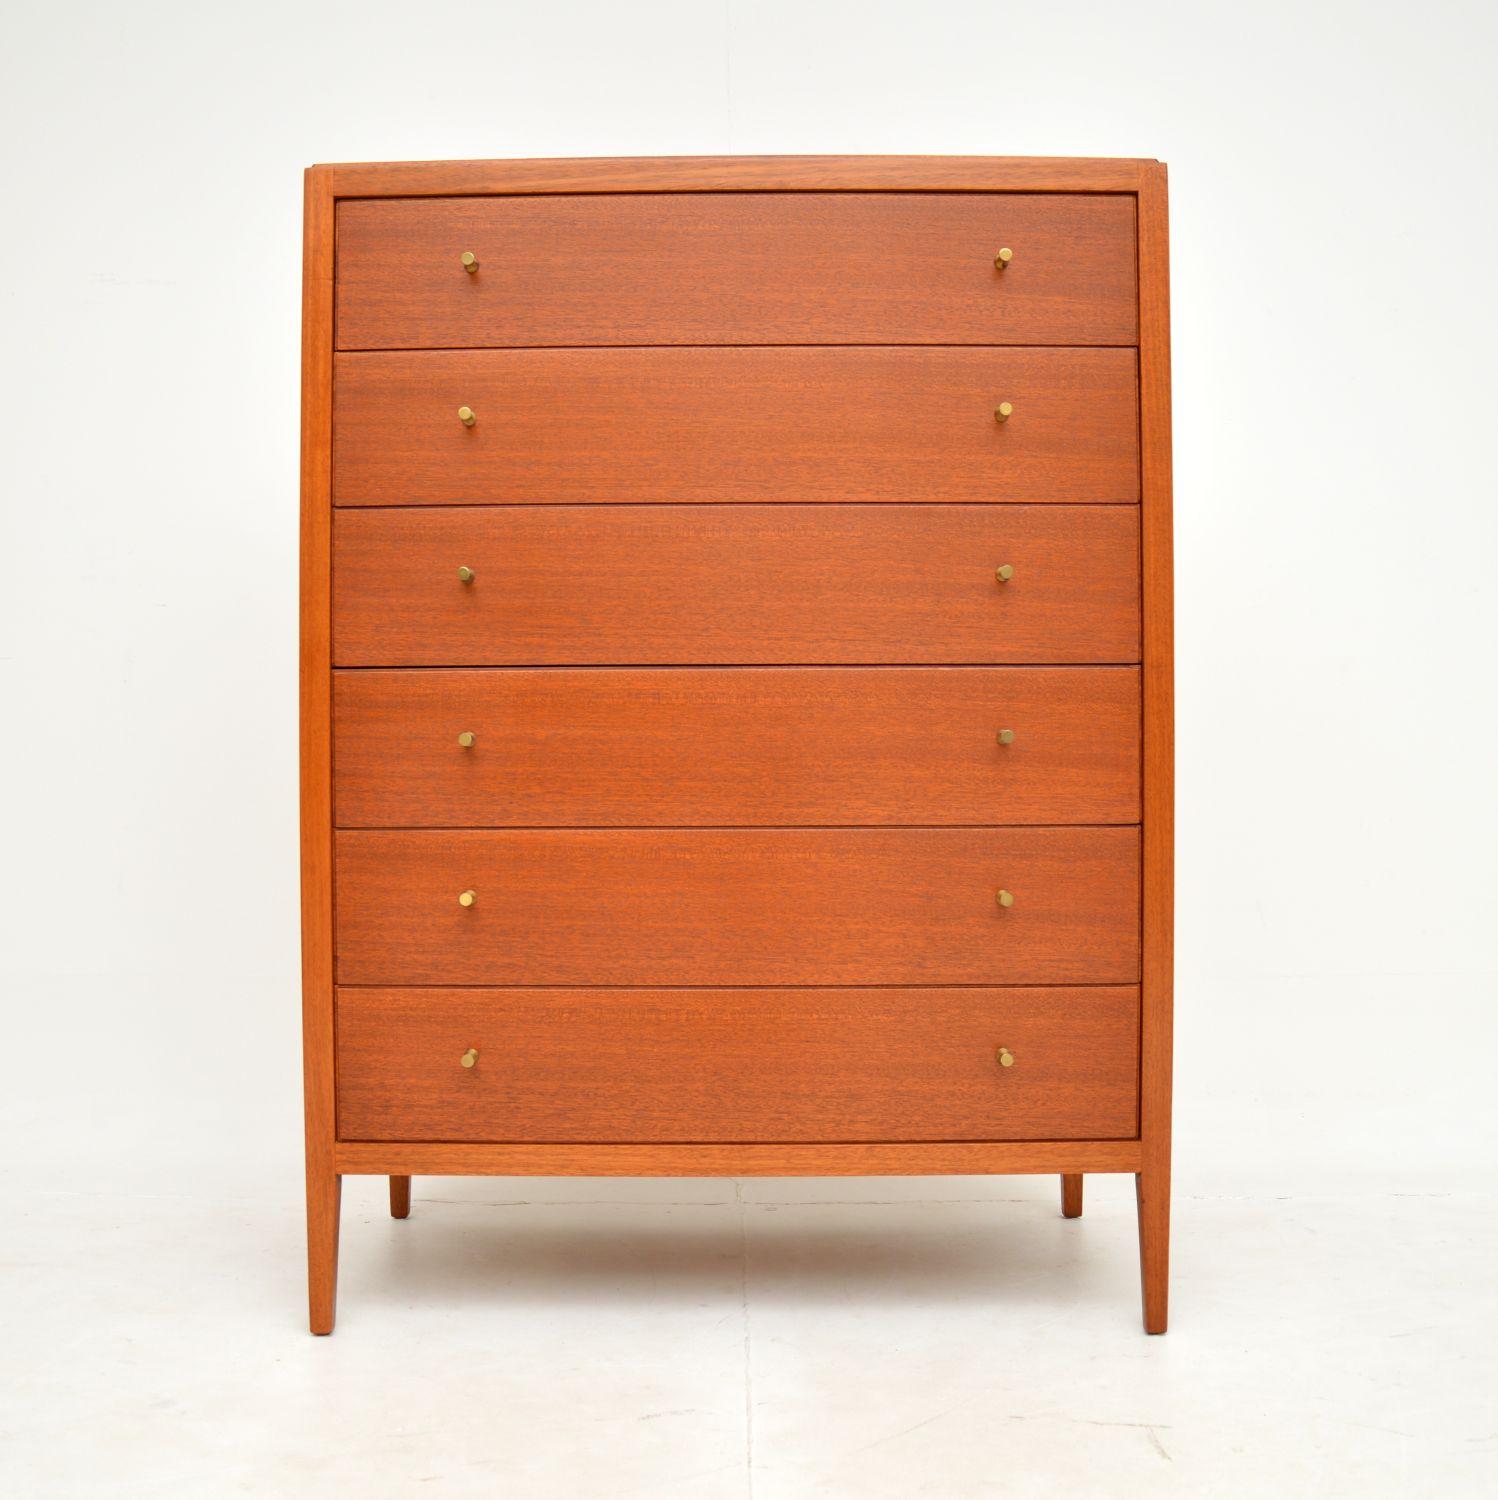 A superb vintage tallboy chest of drawers in wood and brass. This was made by Loughborough furniture in England, it dates from the 1960’s.

It is a fantastic size and is beautifully designed. The quality is amazing, and this has lots of storage